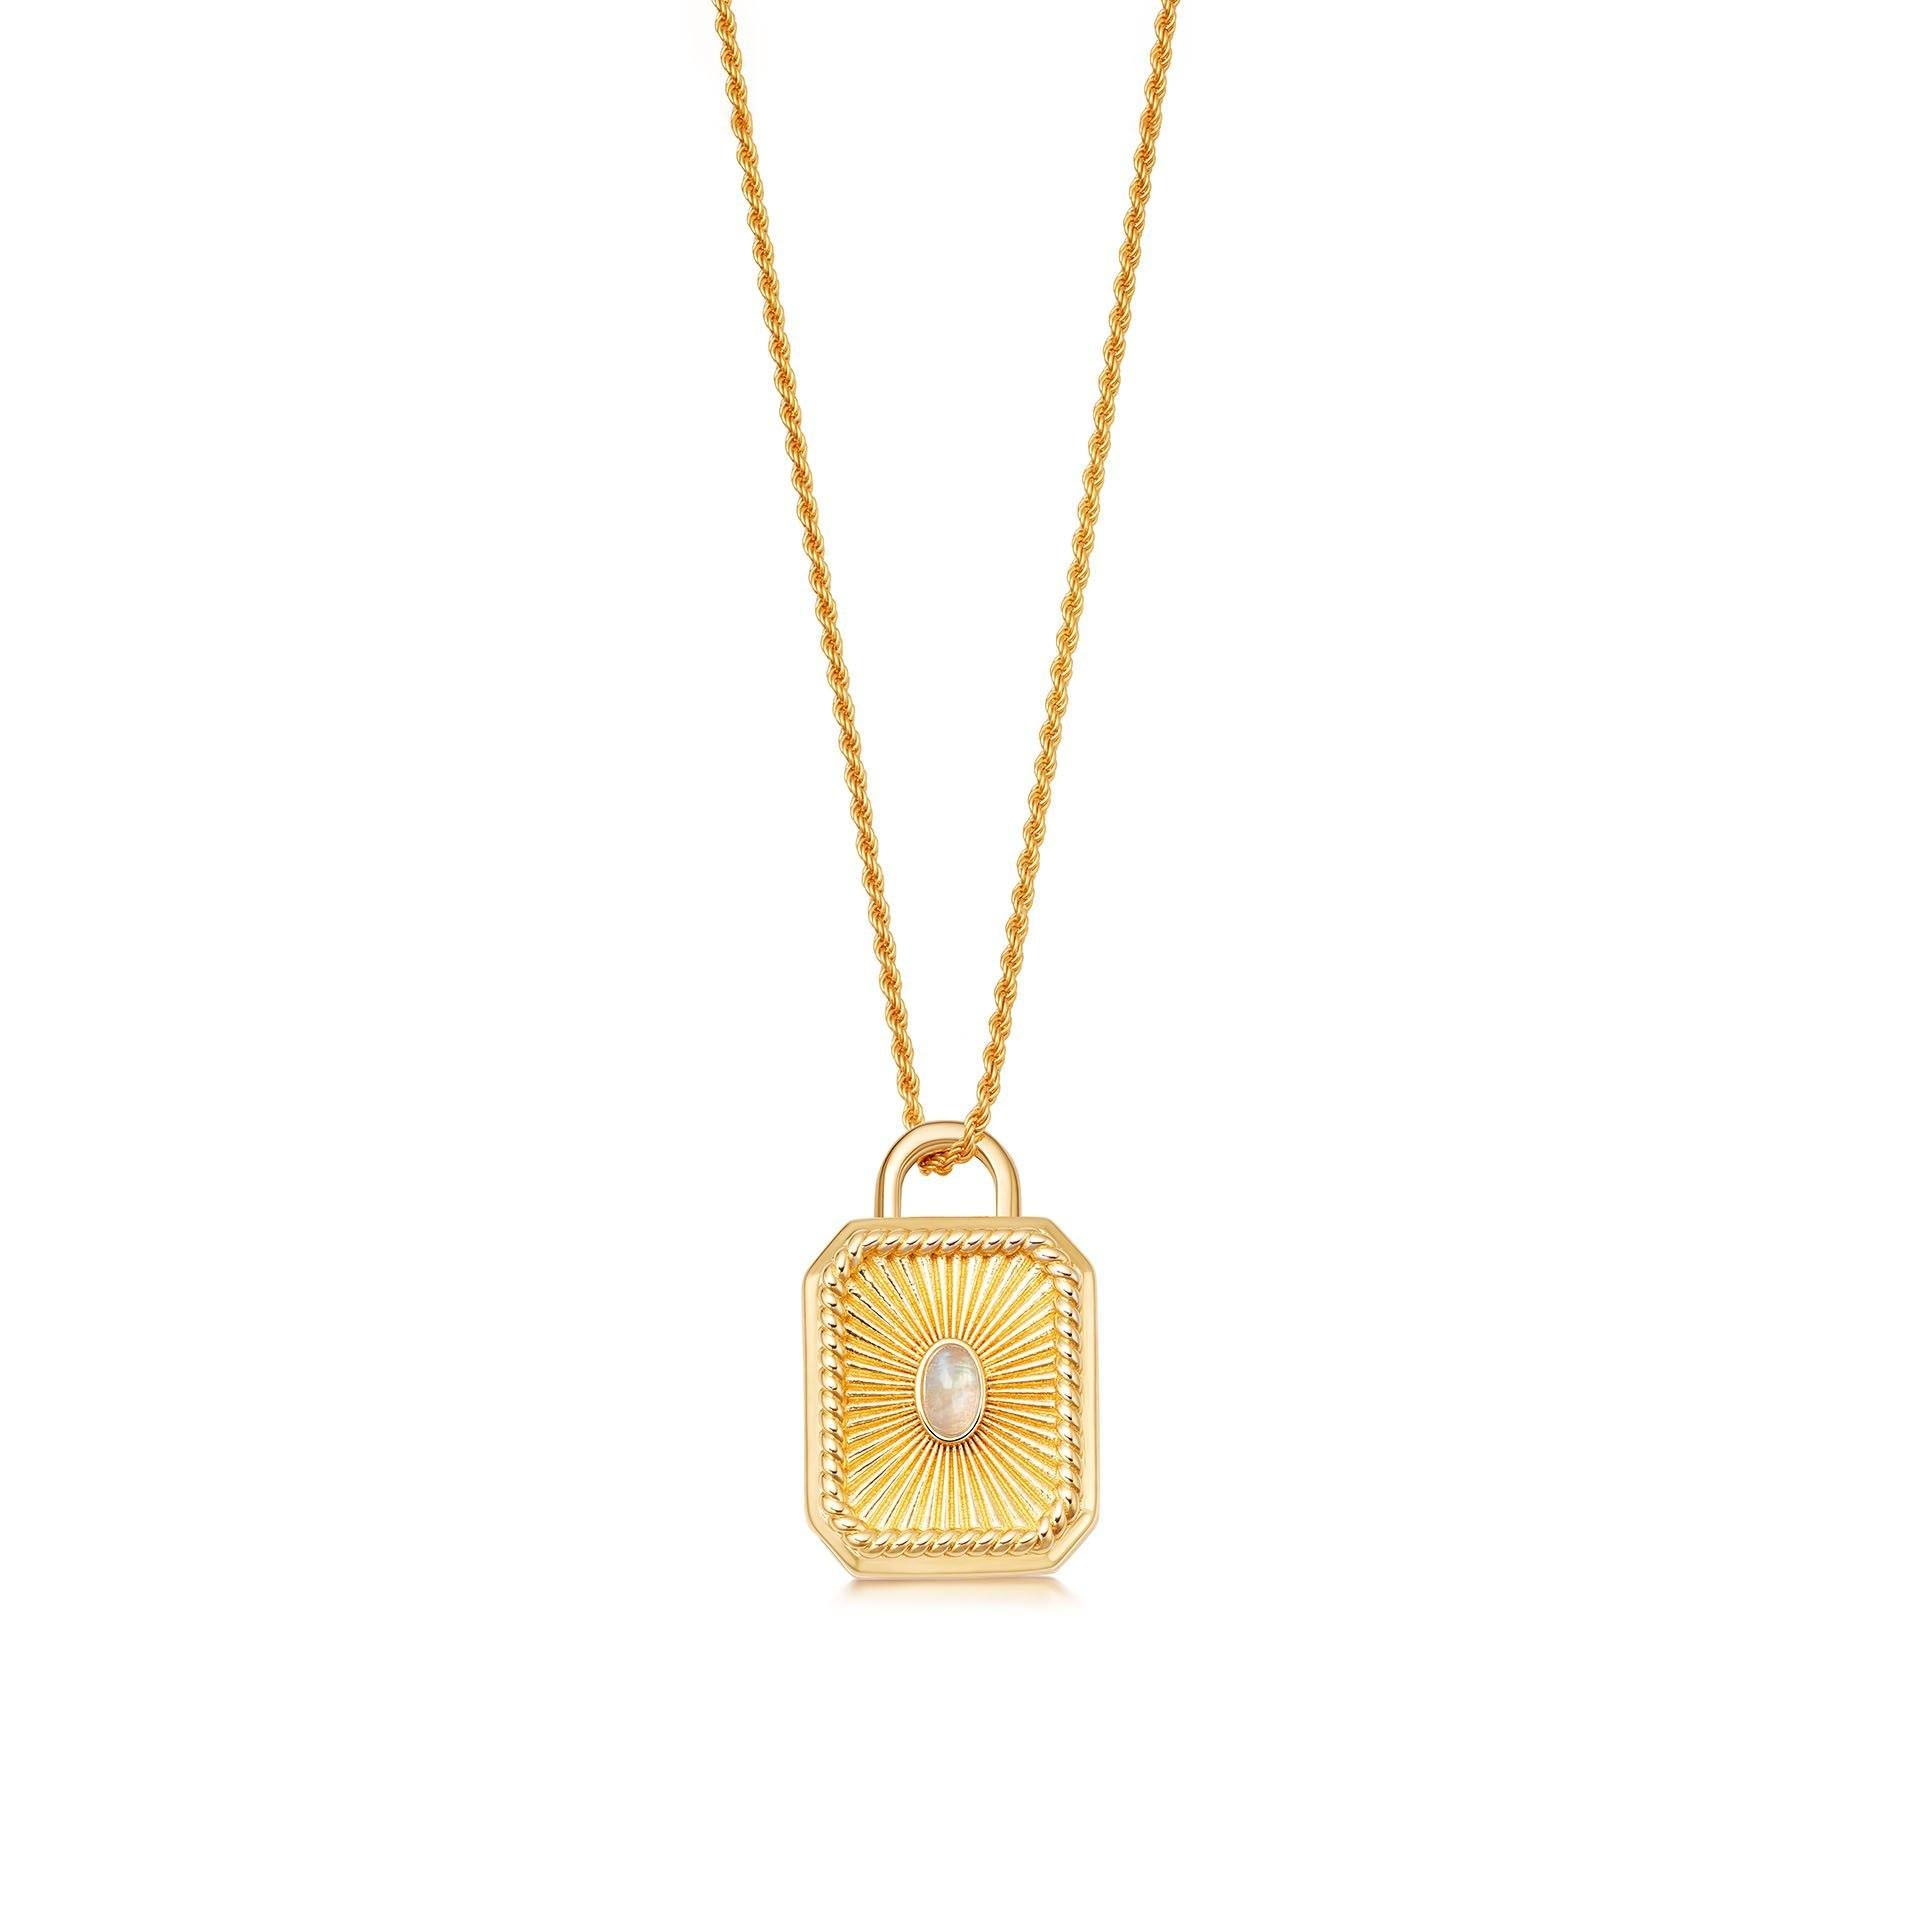 Wholesale Design your jewelry Chain 18ct Gold Vermeil on Sterling OEM/ODM Jewelry Silver Pendant 18ct Gold Plated On Brass